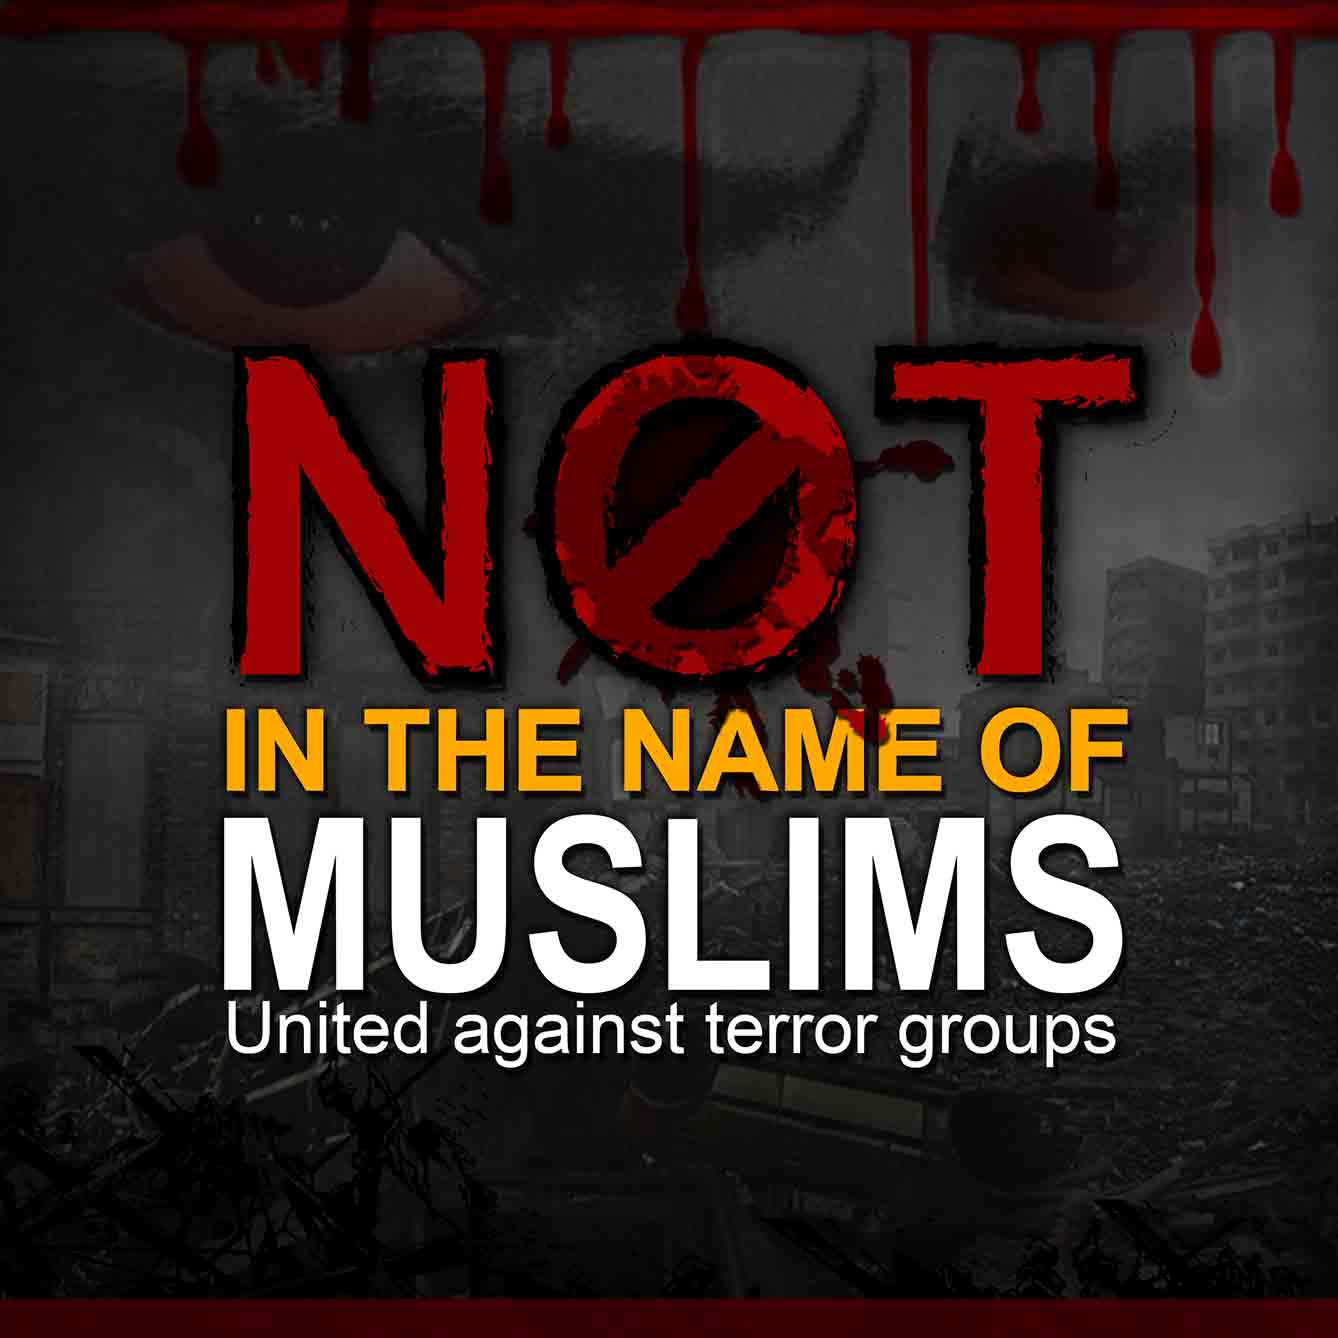 Egypt's Dar al-Ifta has launched a Facebook page called “Not In The Name Of Muslims”